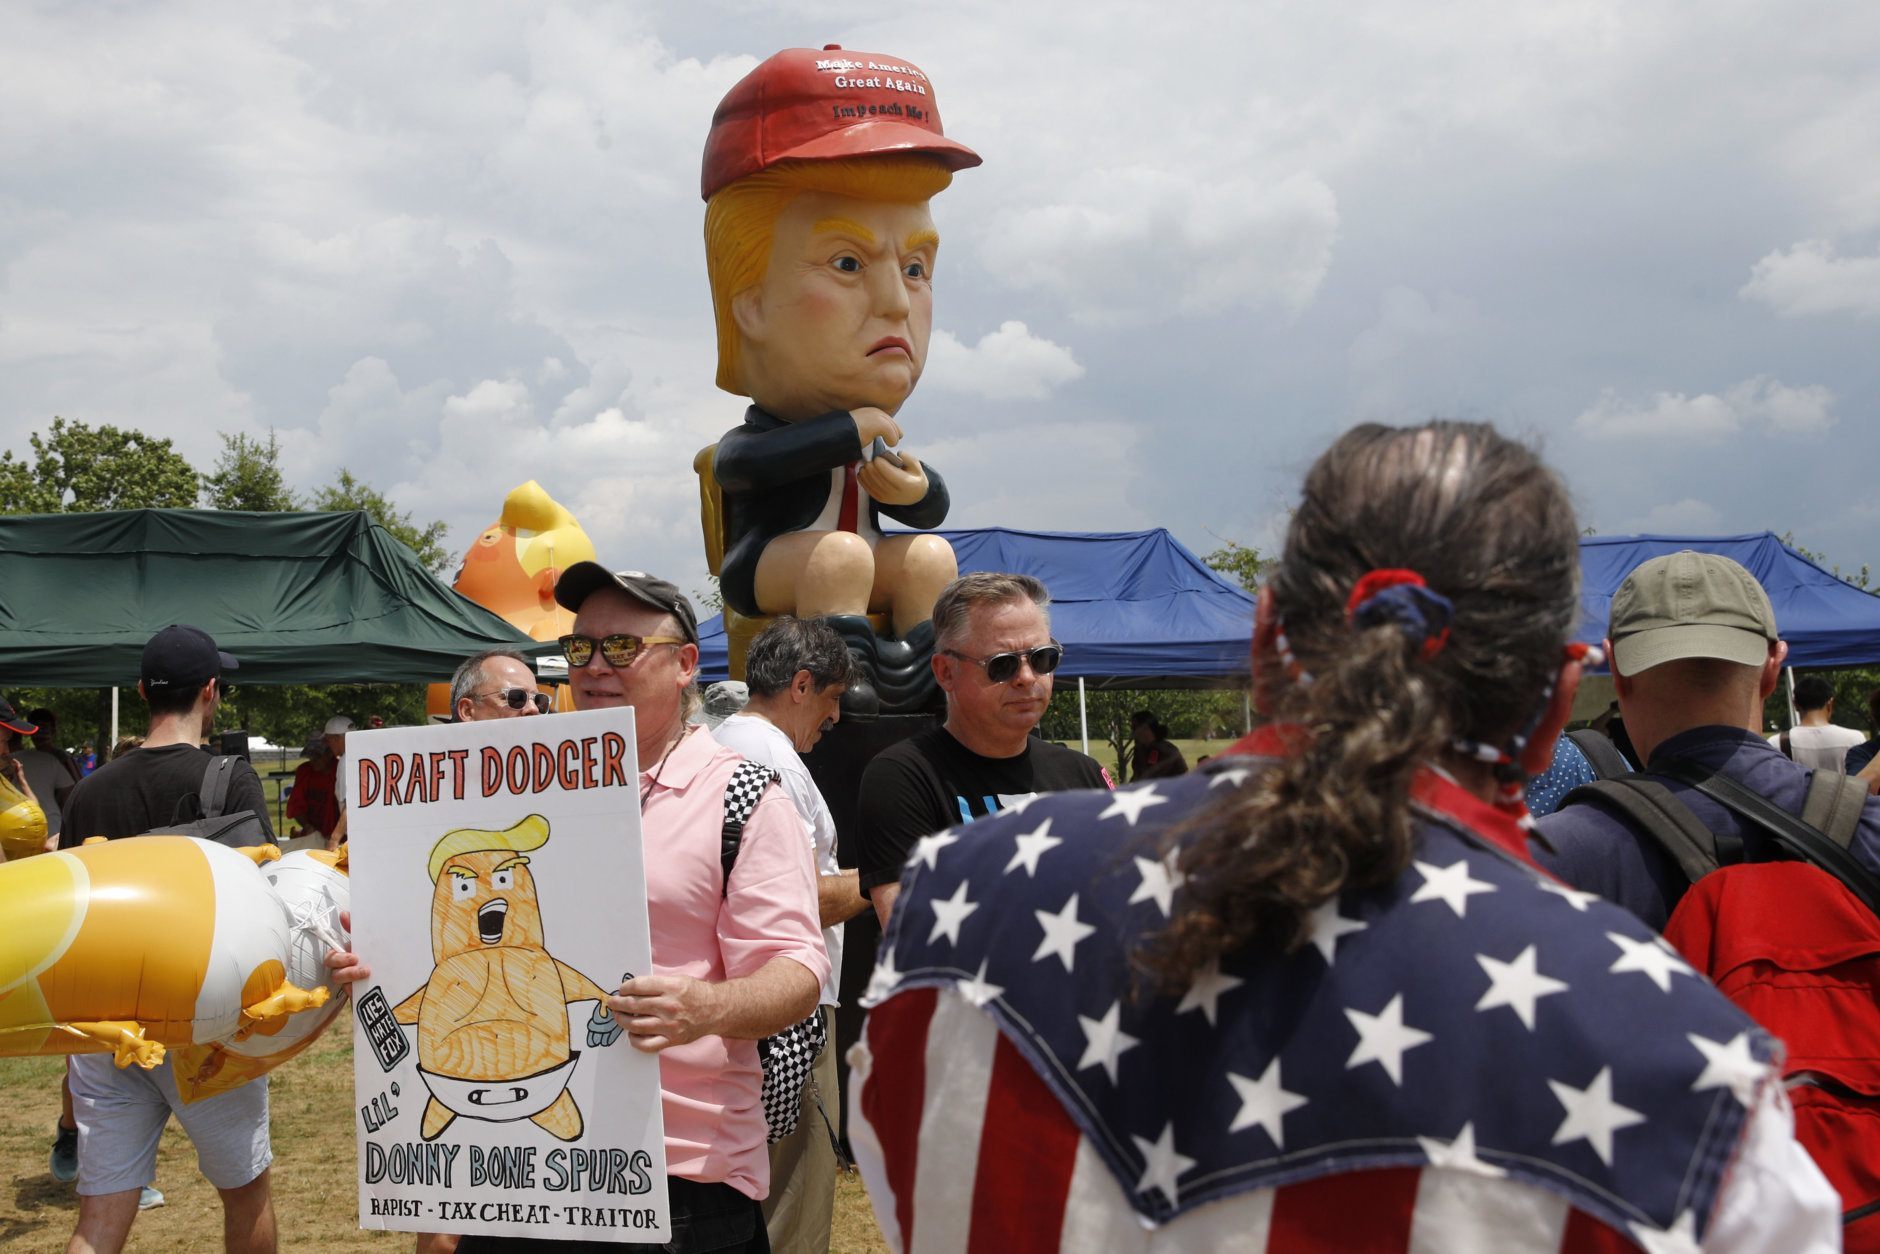 Protesters gather near a sculpture depicting President Donald Trump holding a cell phone on a toilet before Independence Day celebrations, Thursday, July 4, 2019, on the National Mall in Washington. (AP Photo/Patrick Semansky)